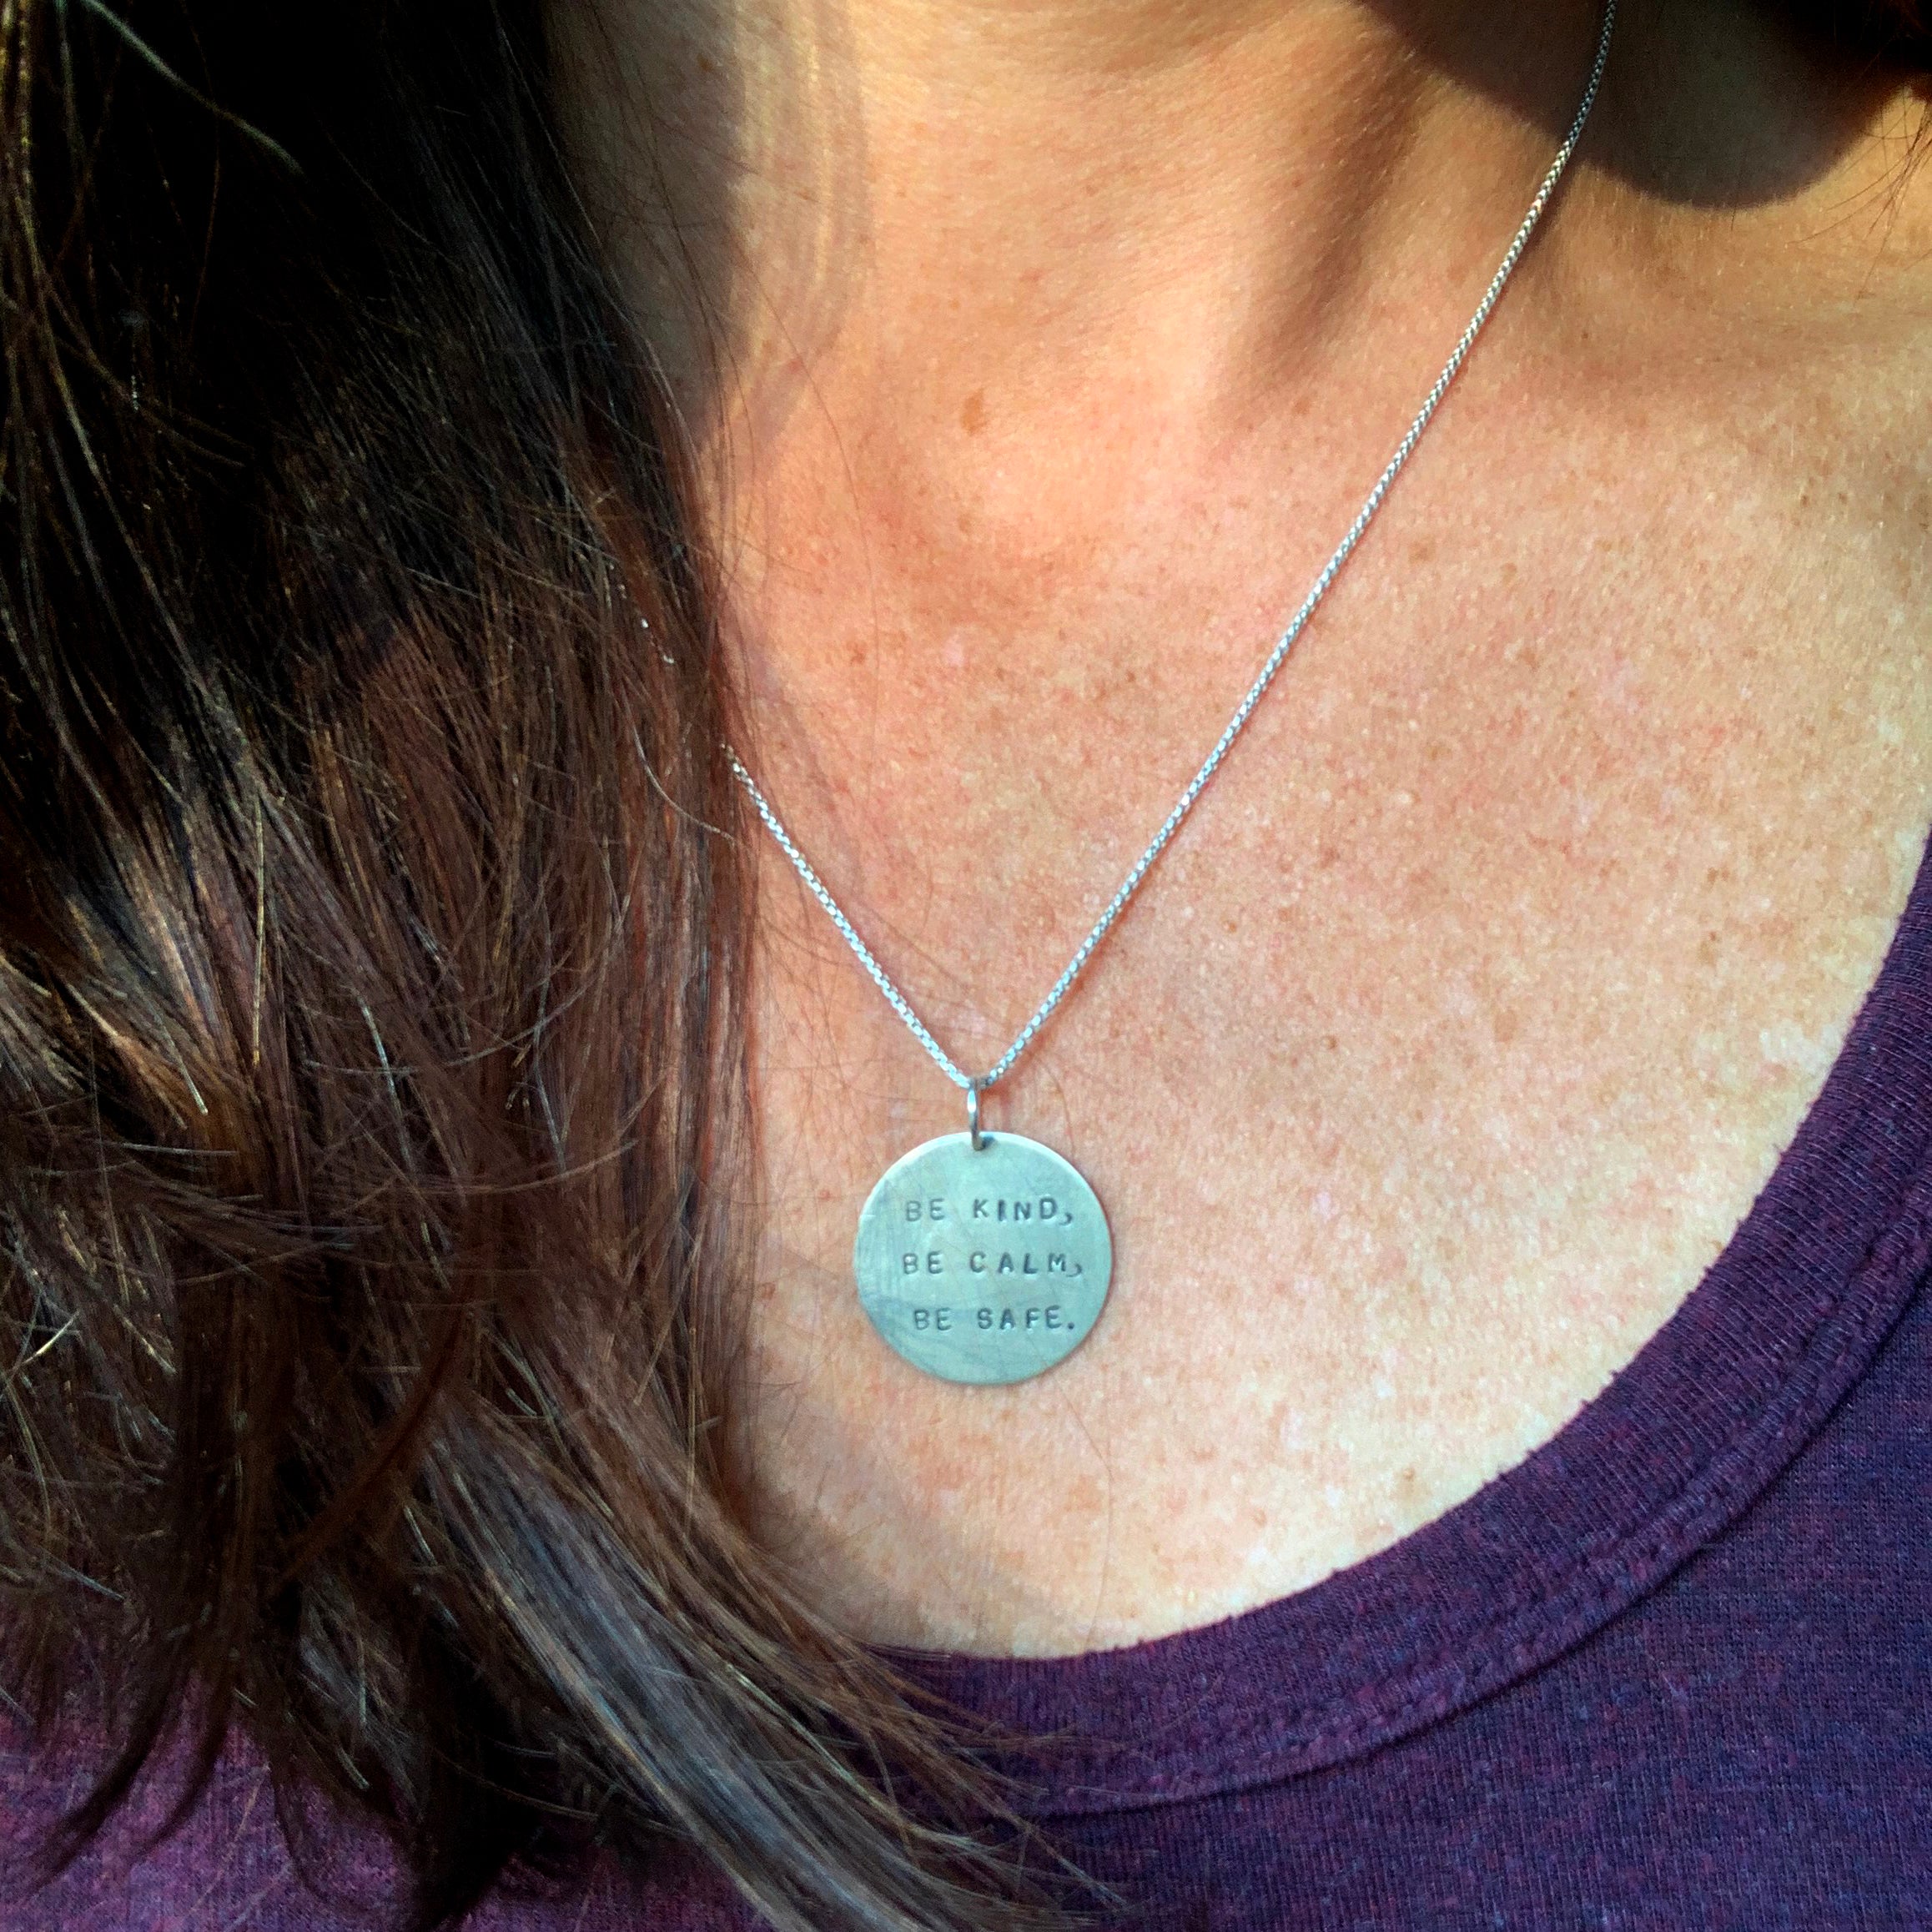 Be Kind, Be Calm, Be Safe Charm (Jewelry for The Common Good)